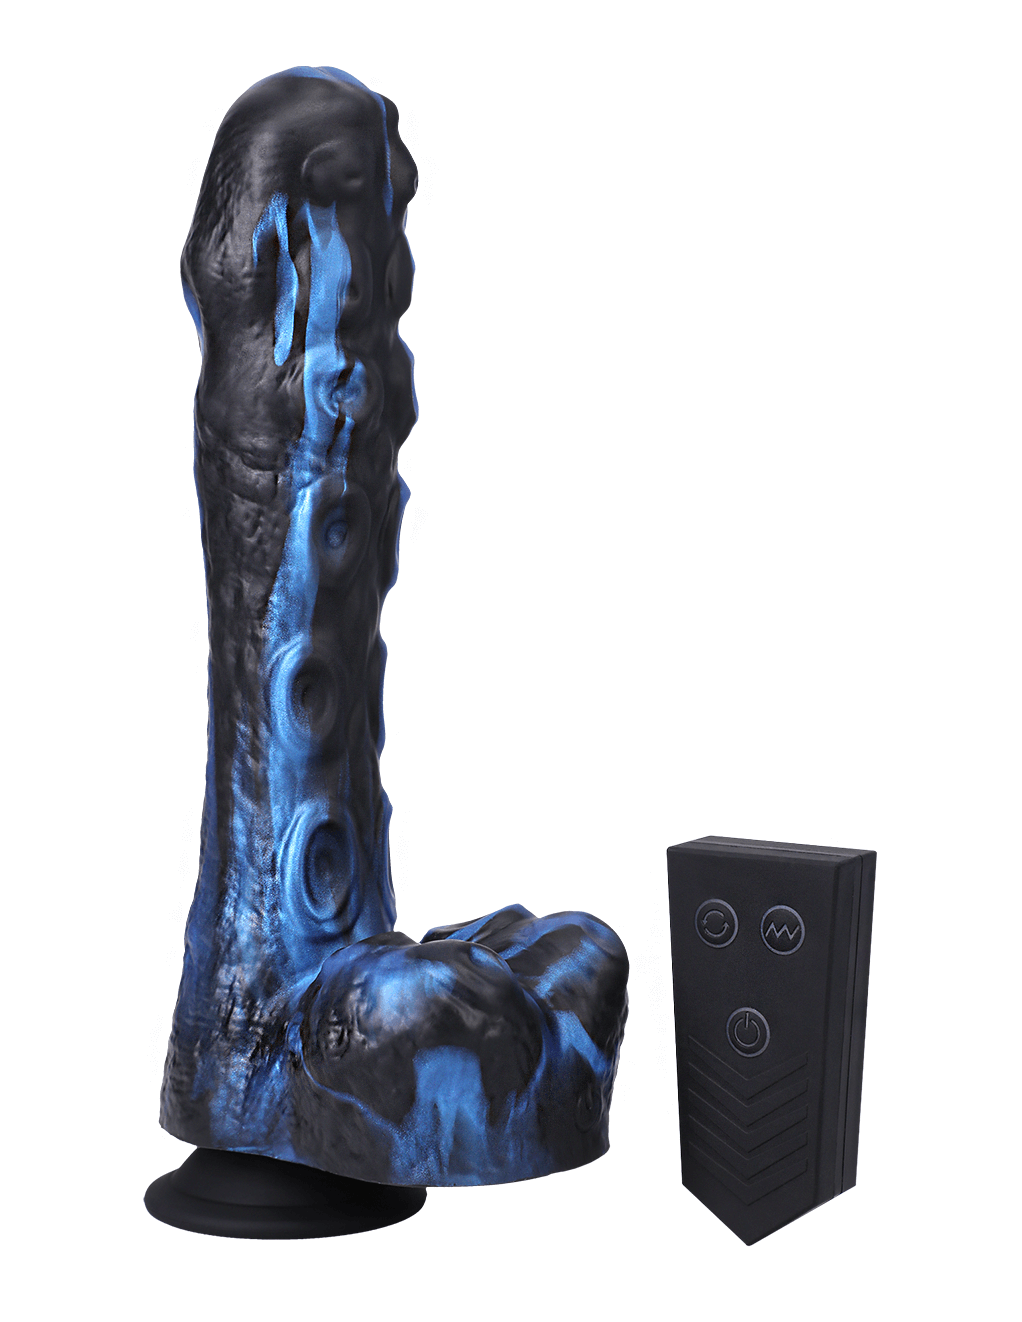 Fort Troff Tendril Thruster - Blue/Black - Product w/Remote